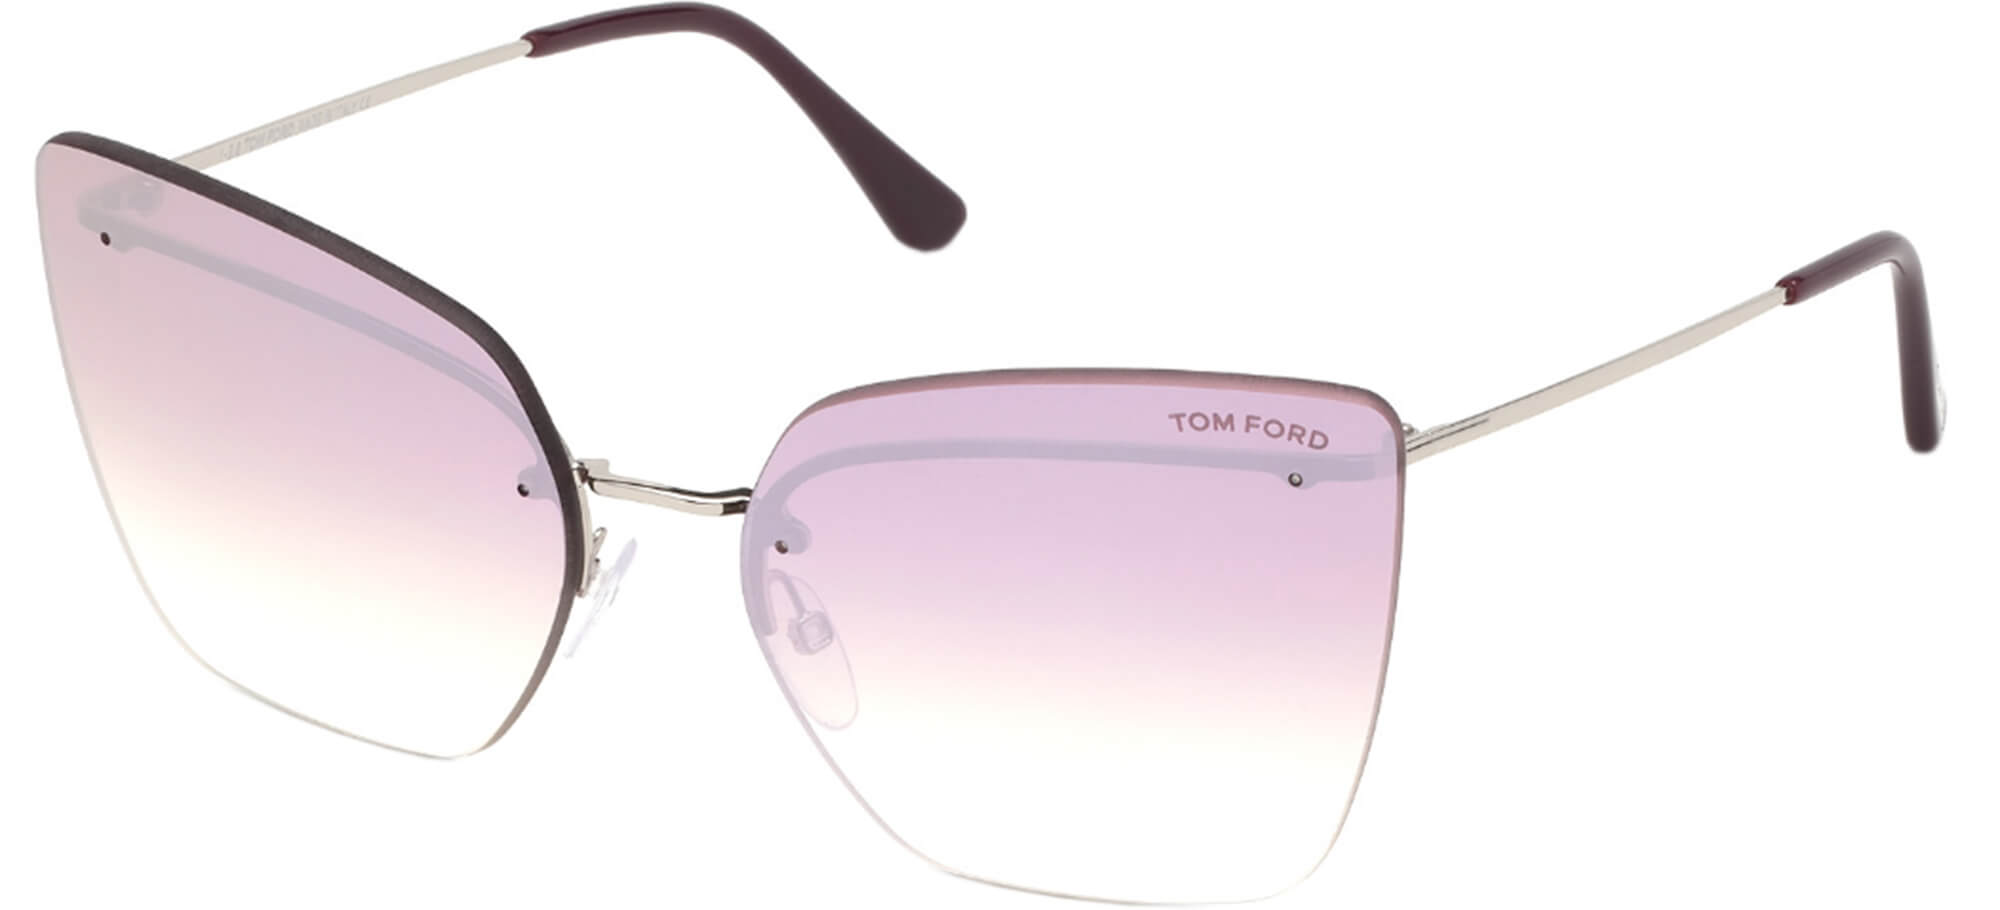 Tom FordCAMILLA-02 FT 0682Silver/pink Shaded (16Z D)